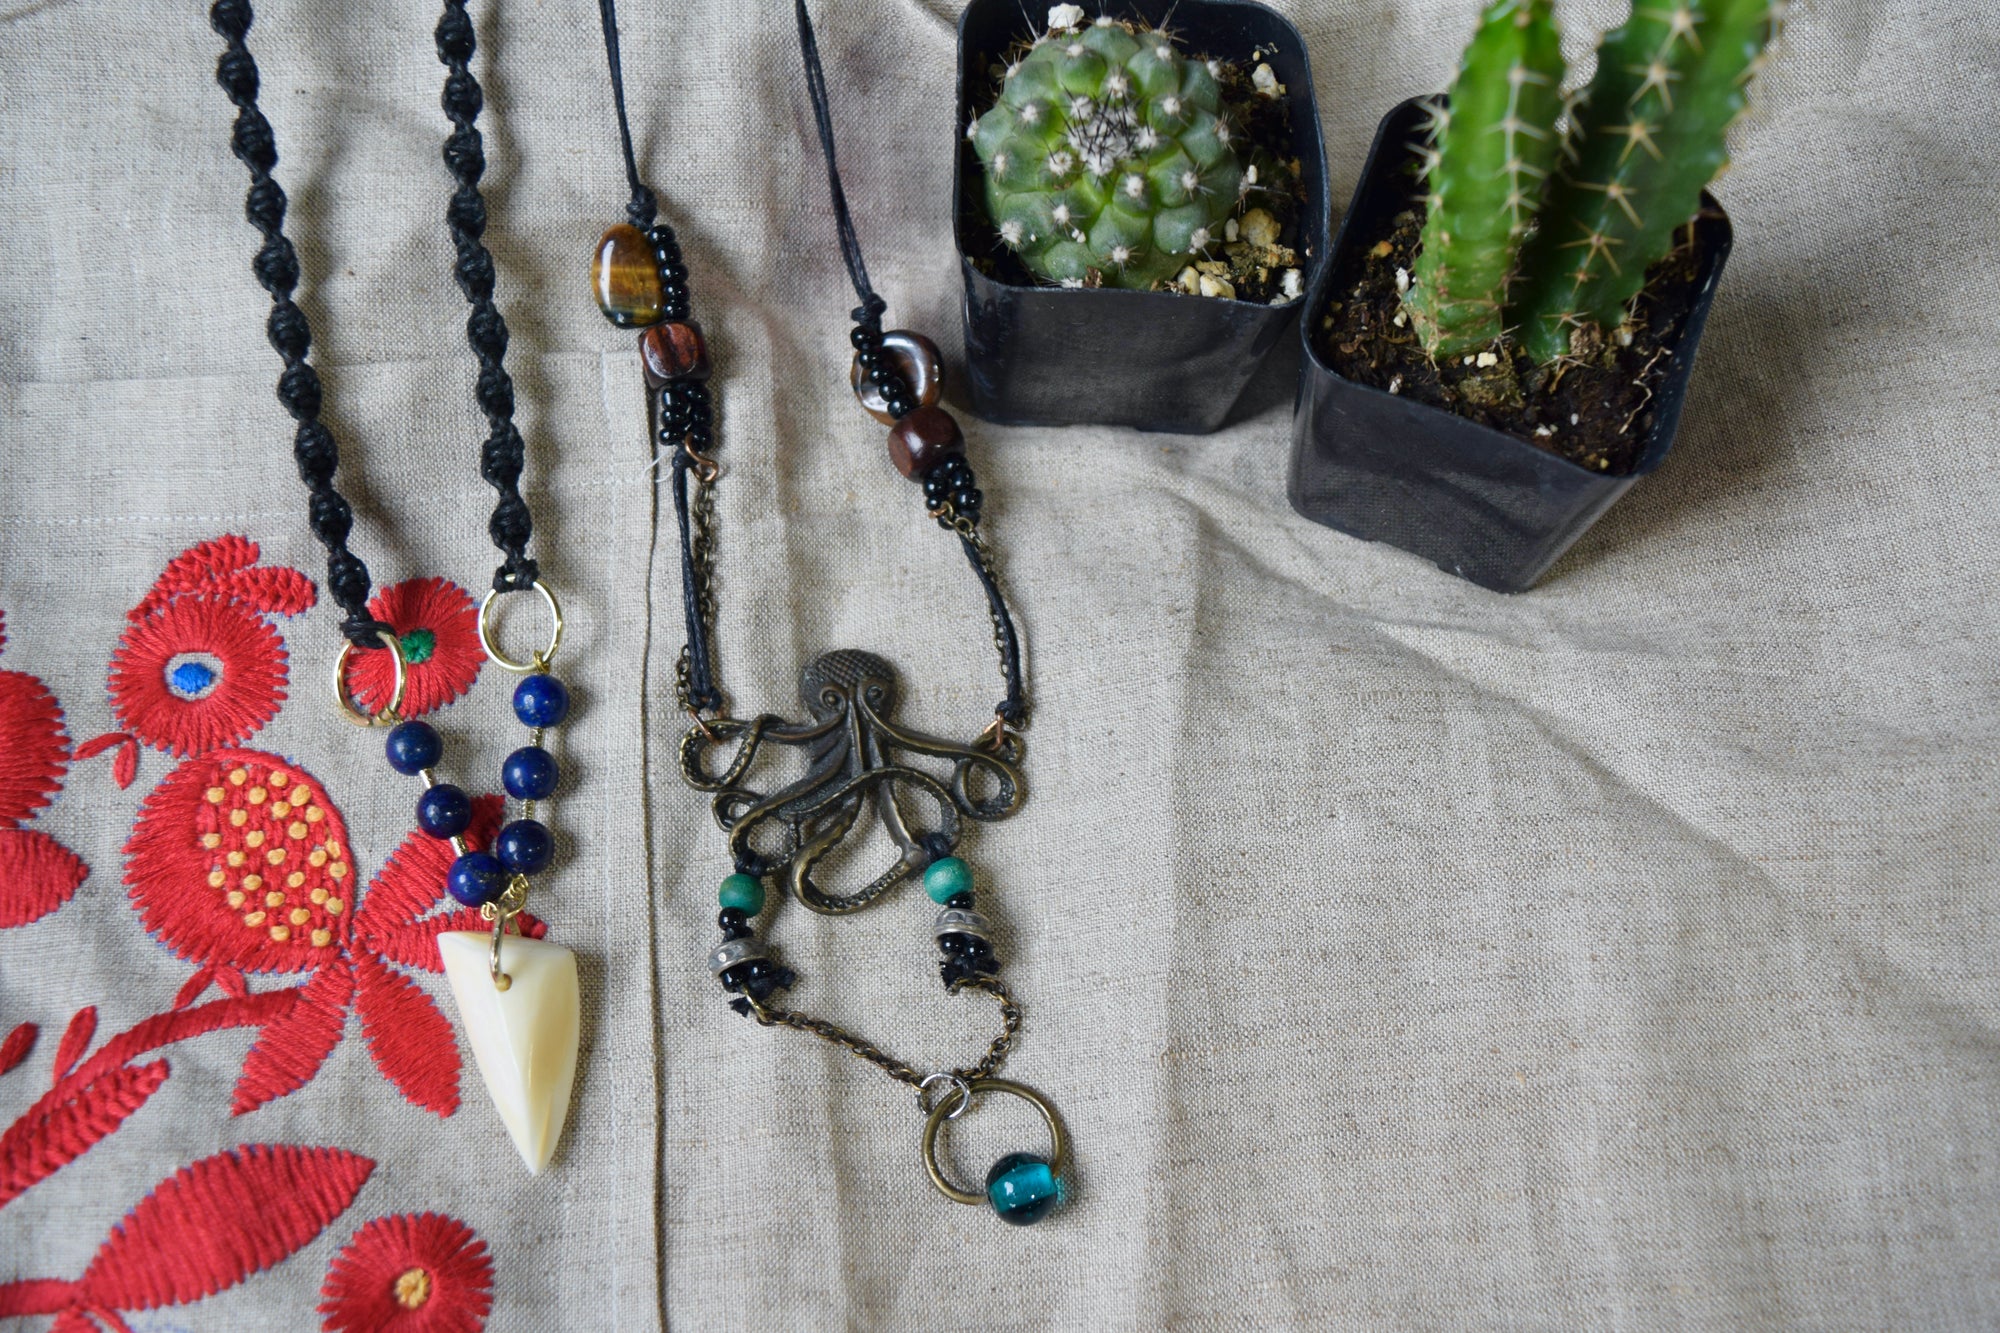 Two necklaces next to two small green cacti. The first necklace has a twisted black fiber chain with blue beads and a white stone hanging from it. The other has a thin black fiber chain with tiger's eye beads. Towards the bottom there is a dark metal octopus. Below it there are beads of various colors.